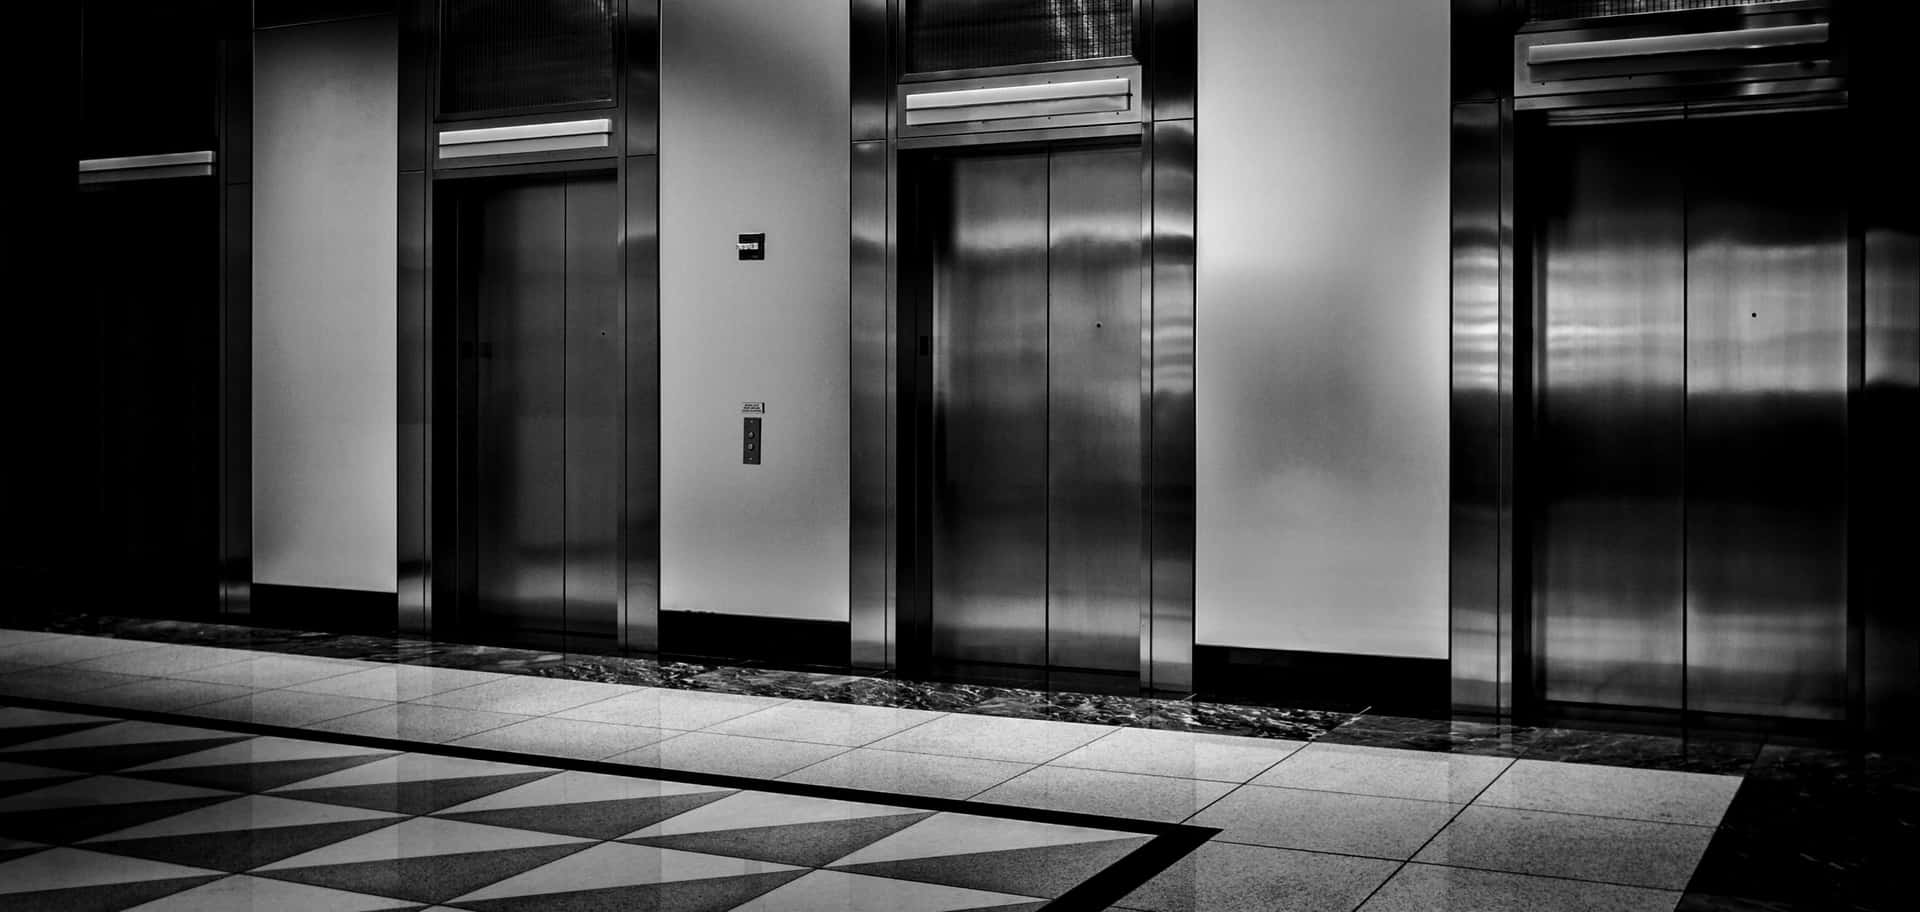 Black And White Photo Of Elevators In A Building